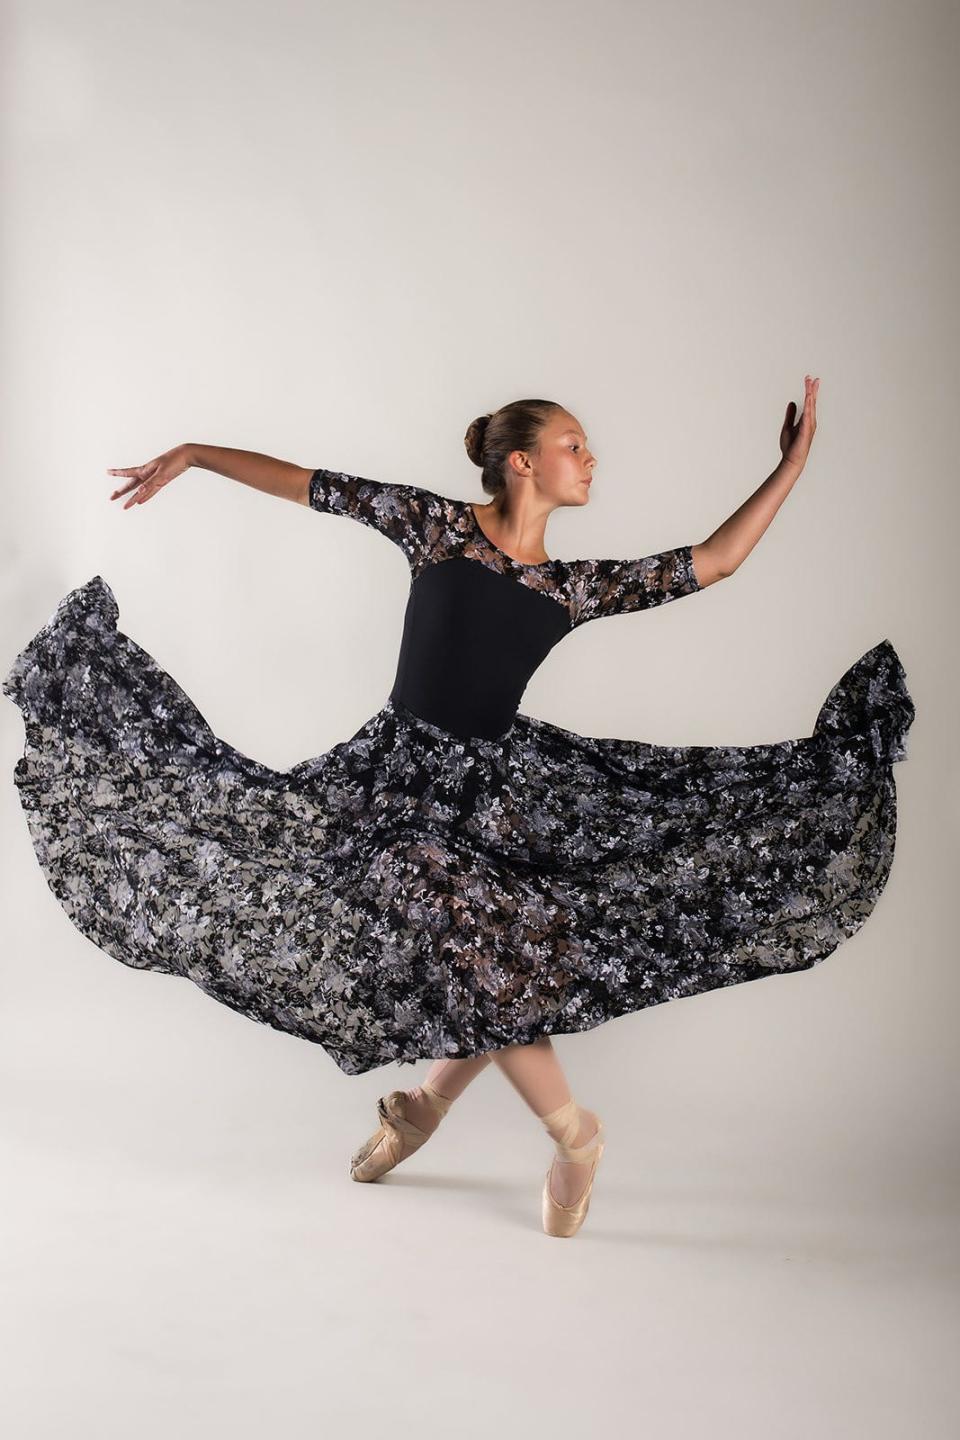 GO! Contemporary Danceworks’ Mary Virginia Bohner executes a graceful turn in the company’s 20th anniversary celebration entitled “reGENERATION” at the Tennessee Amphitheater on Sept. 29.